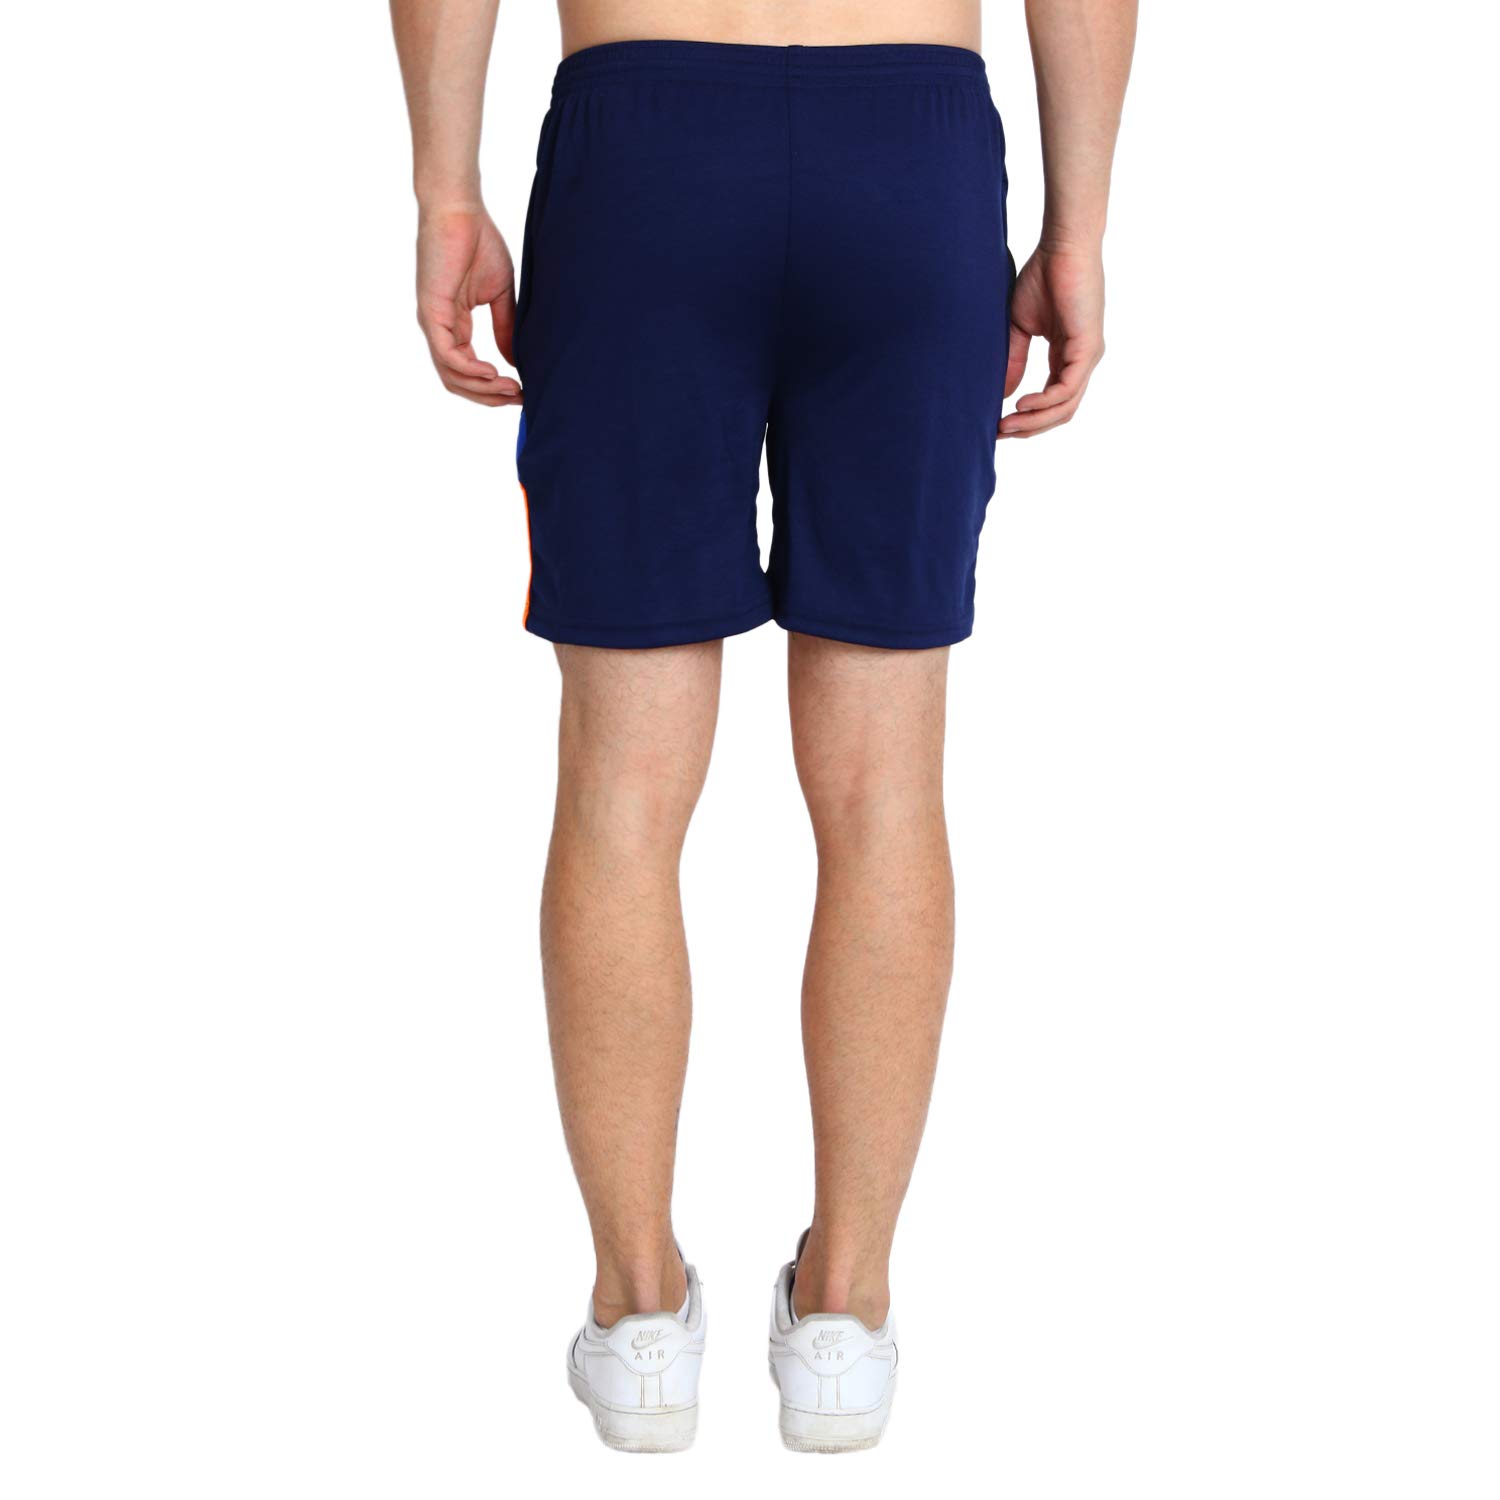 Buy Dia A Dia Sports Shorts for Men 100 Quality Material Zip Pockets ...